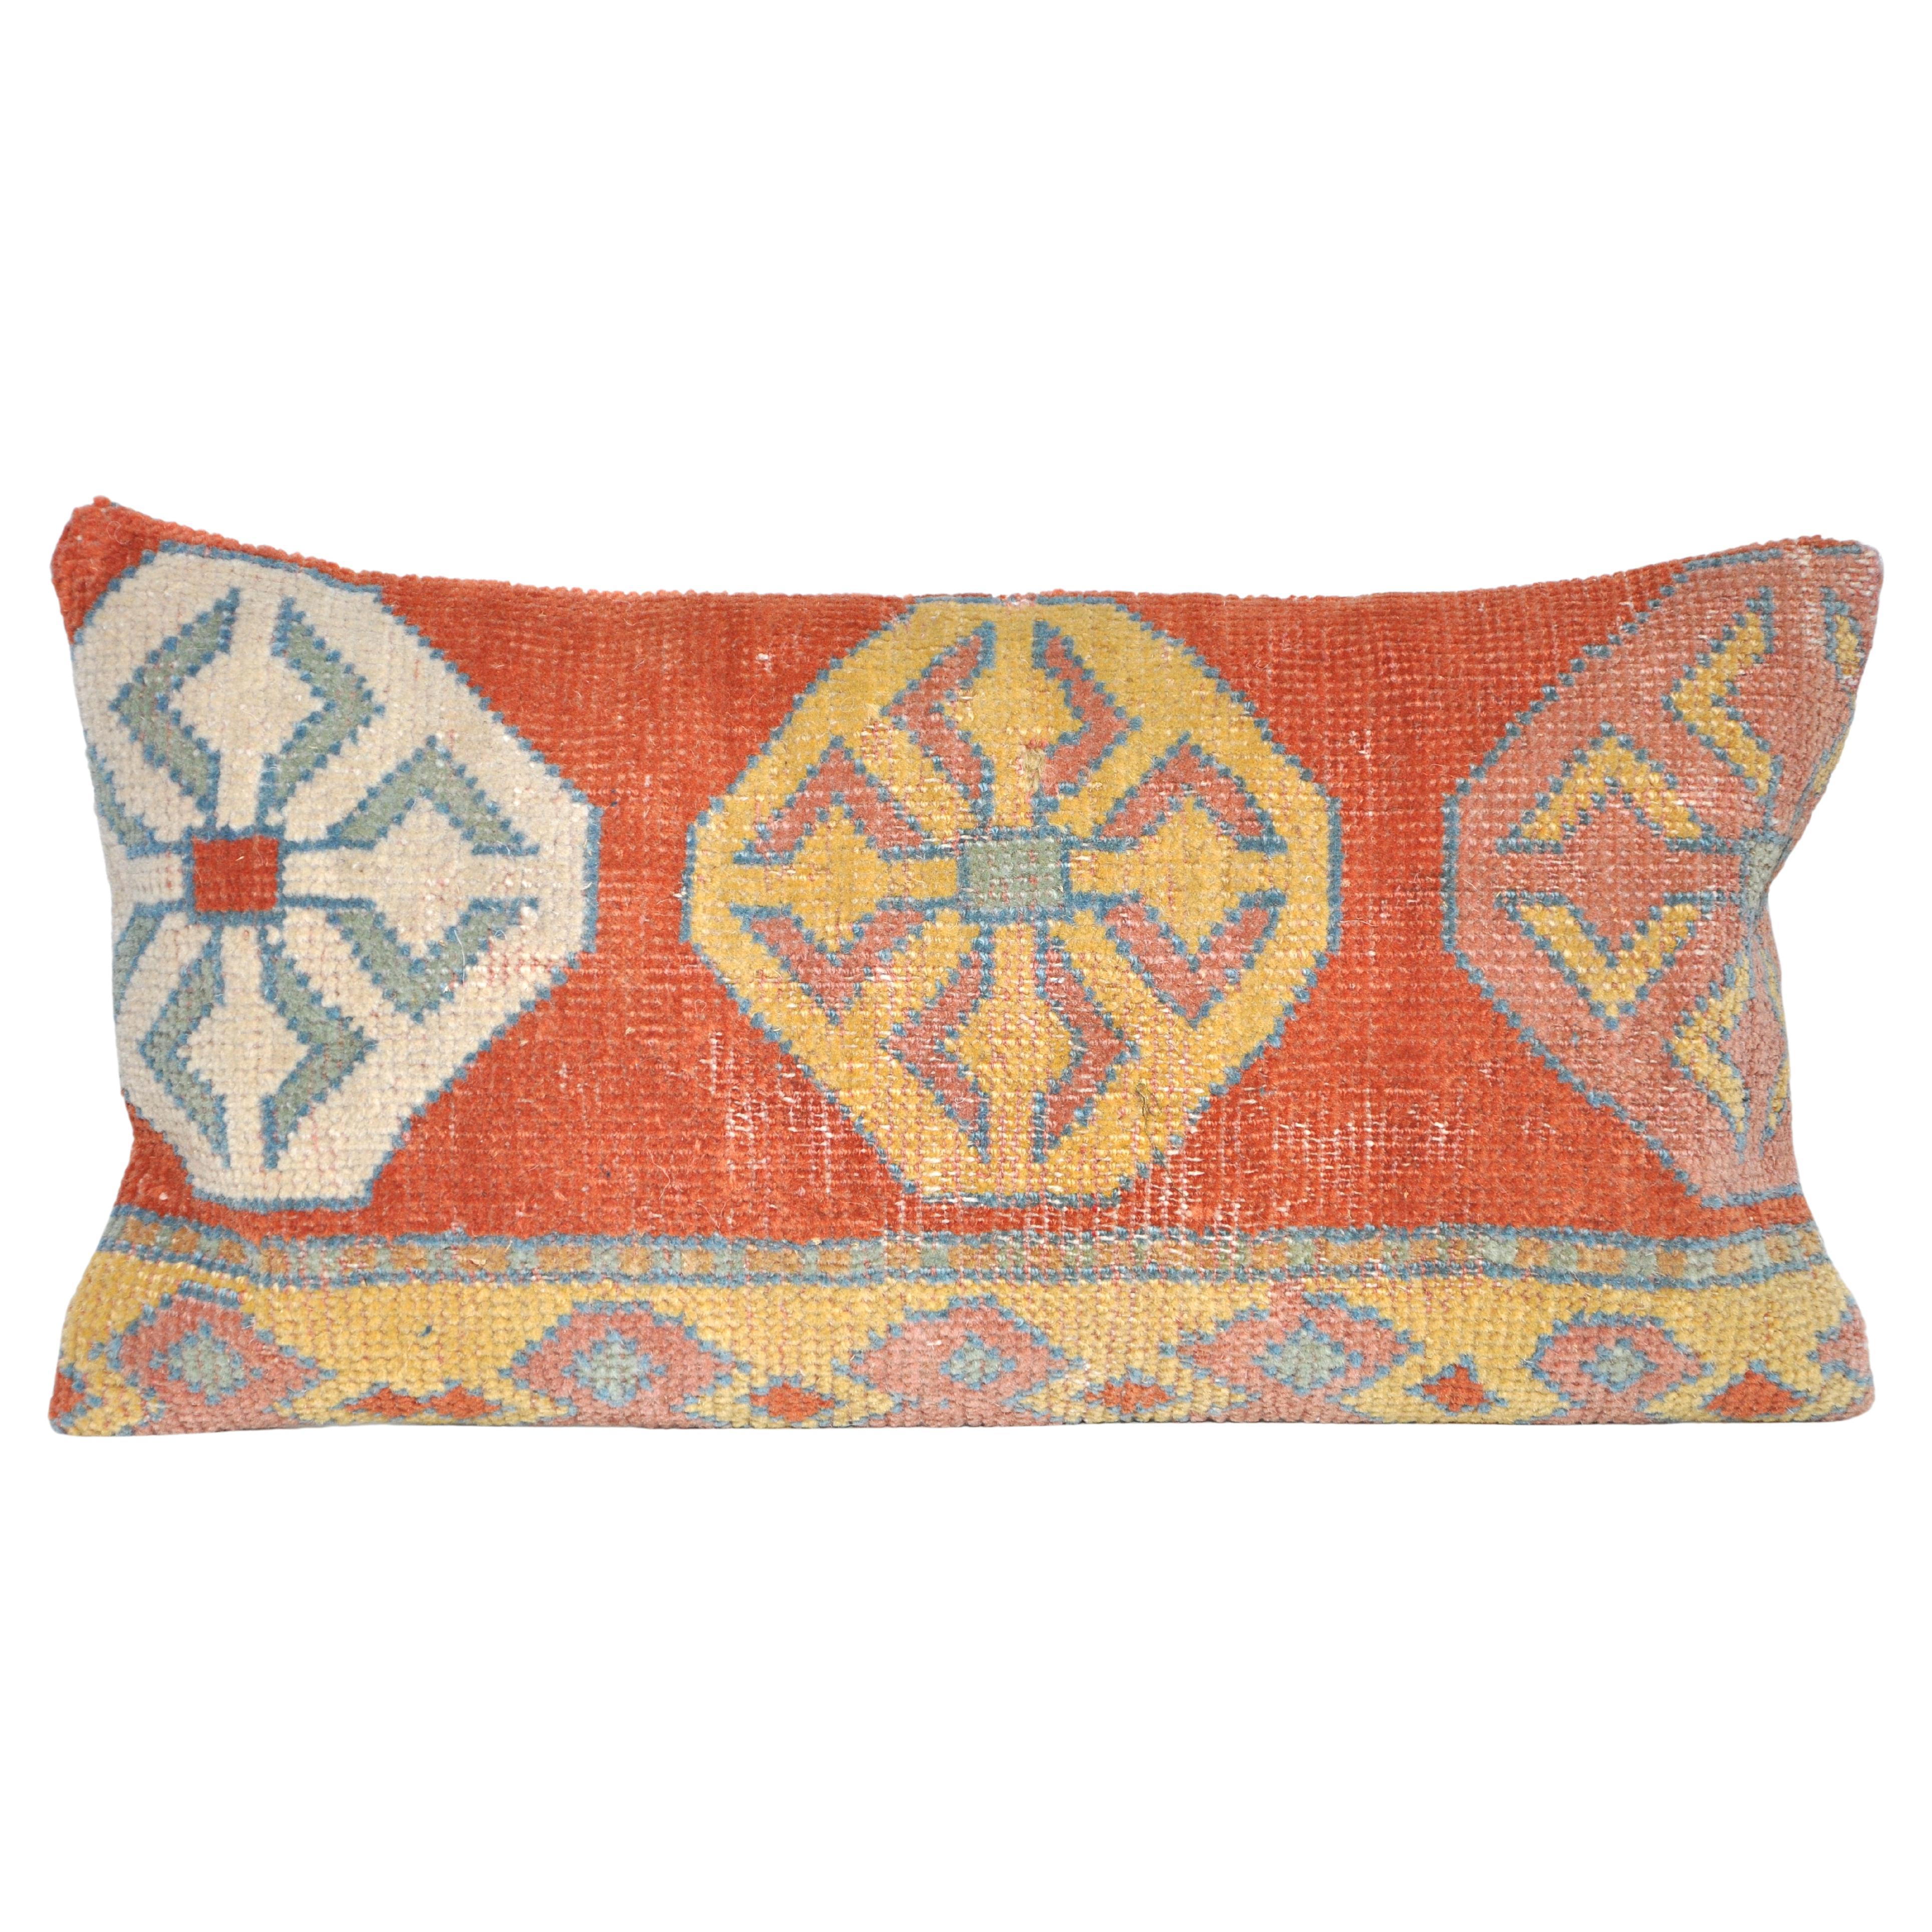 Vintage Kilim Rug Pillow with Irish Linen by Katie Larmour Cushions Geometric For Sale